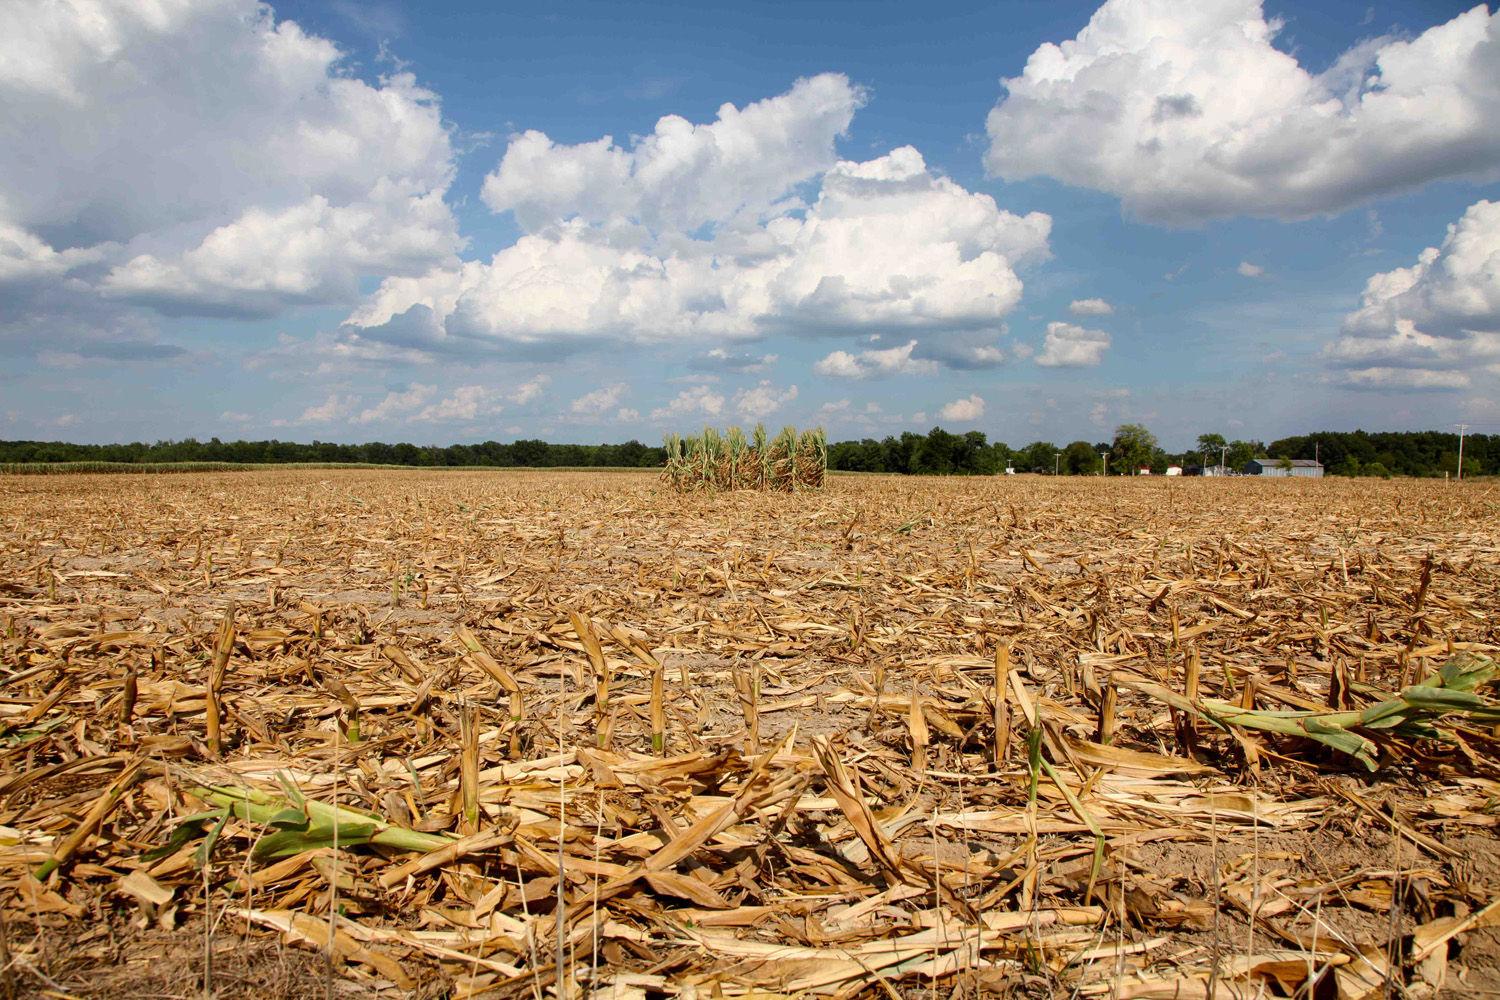 July 16, 2012. Four rows of corn left for insurance adjusters to examine are all that remain of a 40-acre cornfield in Geff, Ill. that was mowed down.